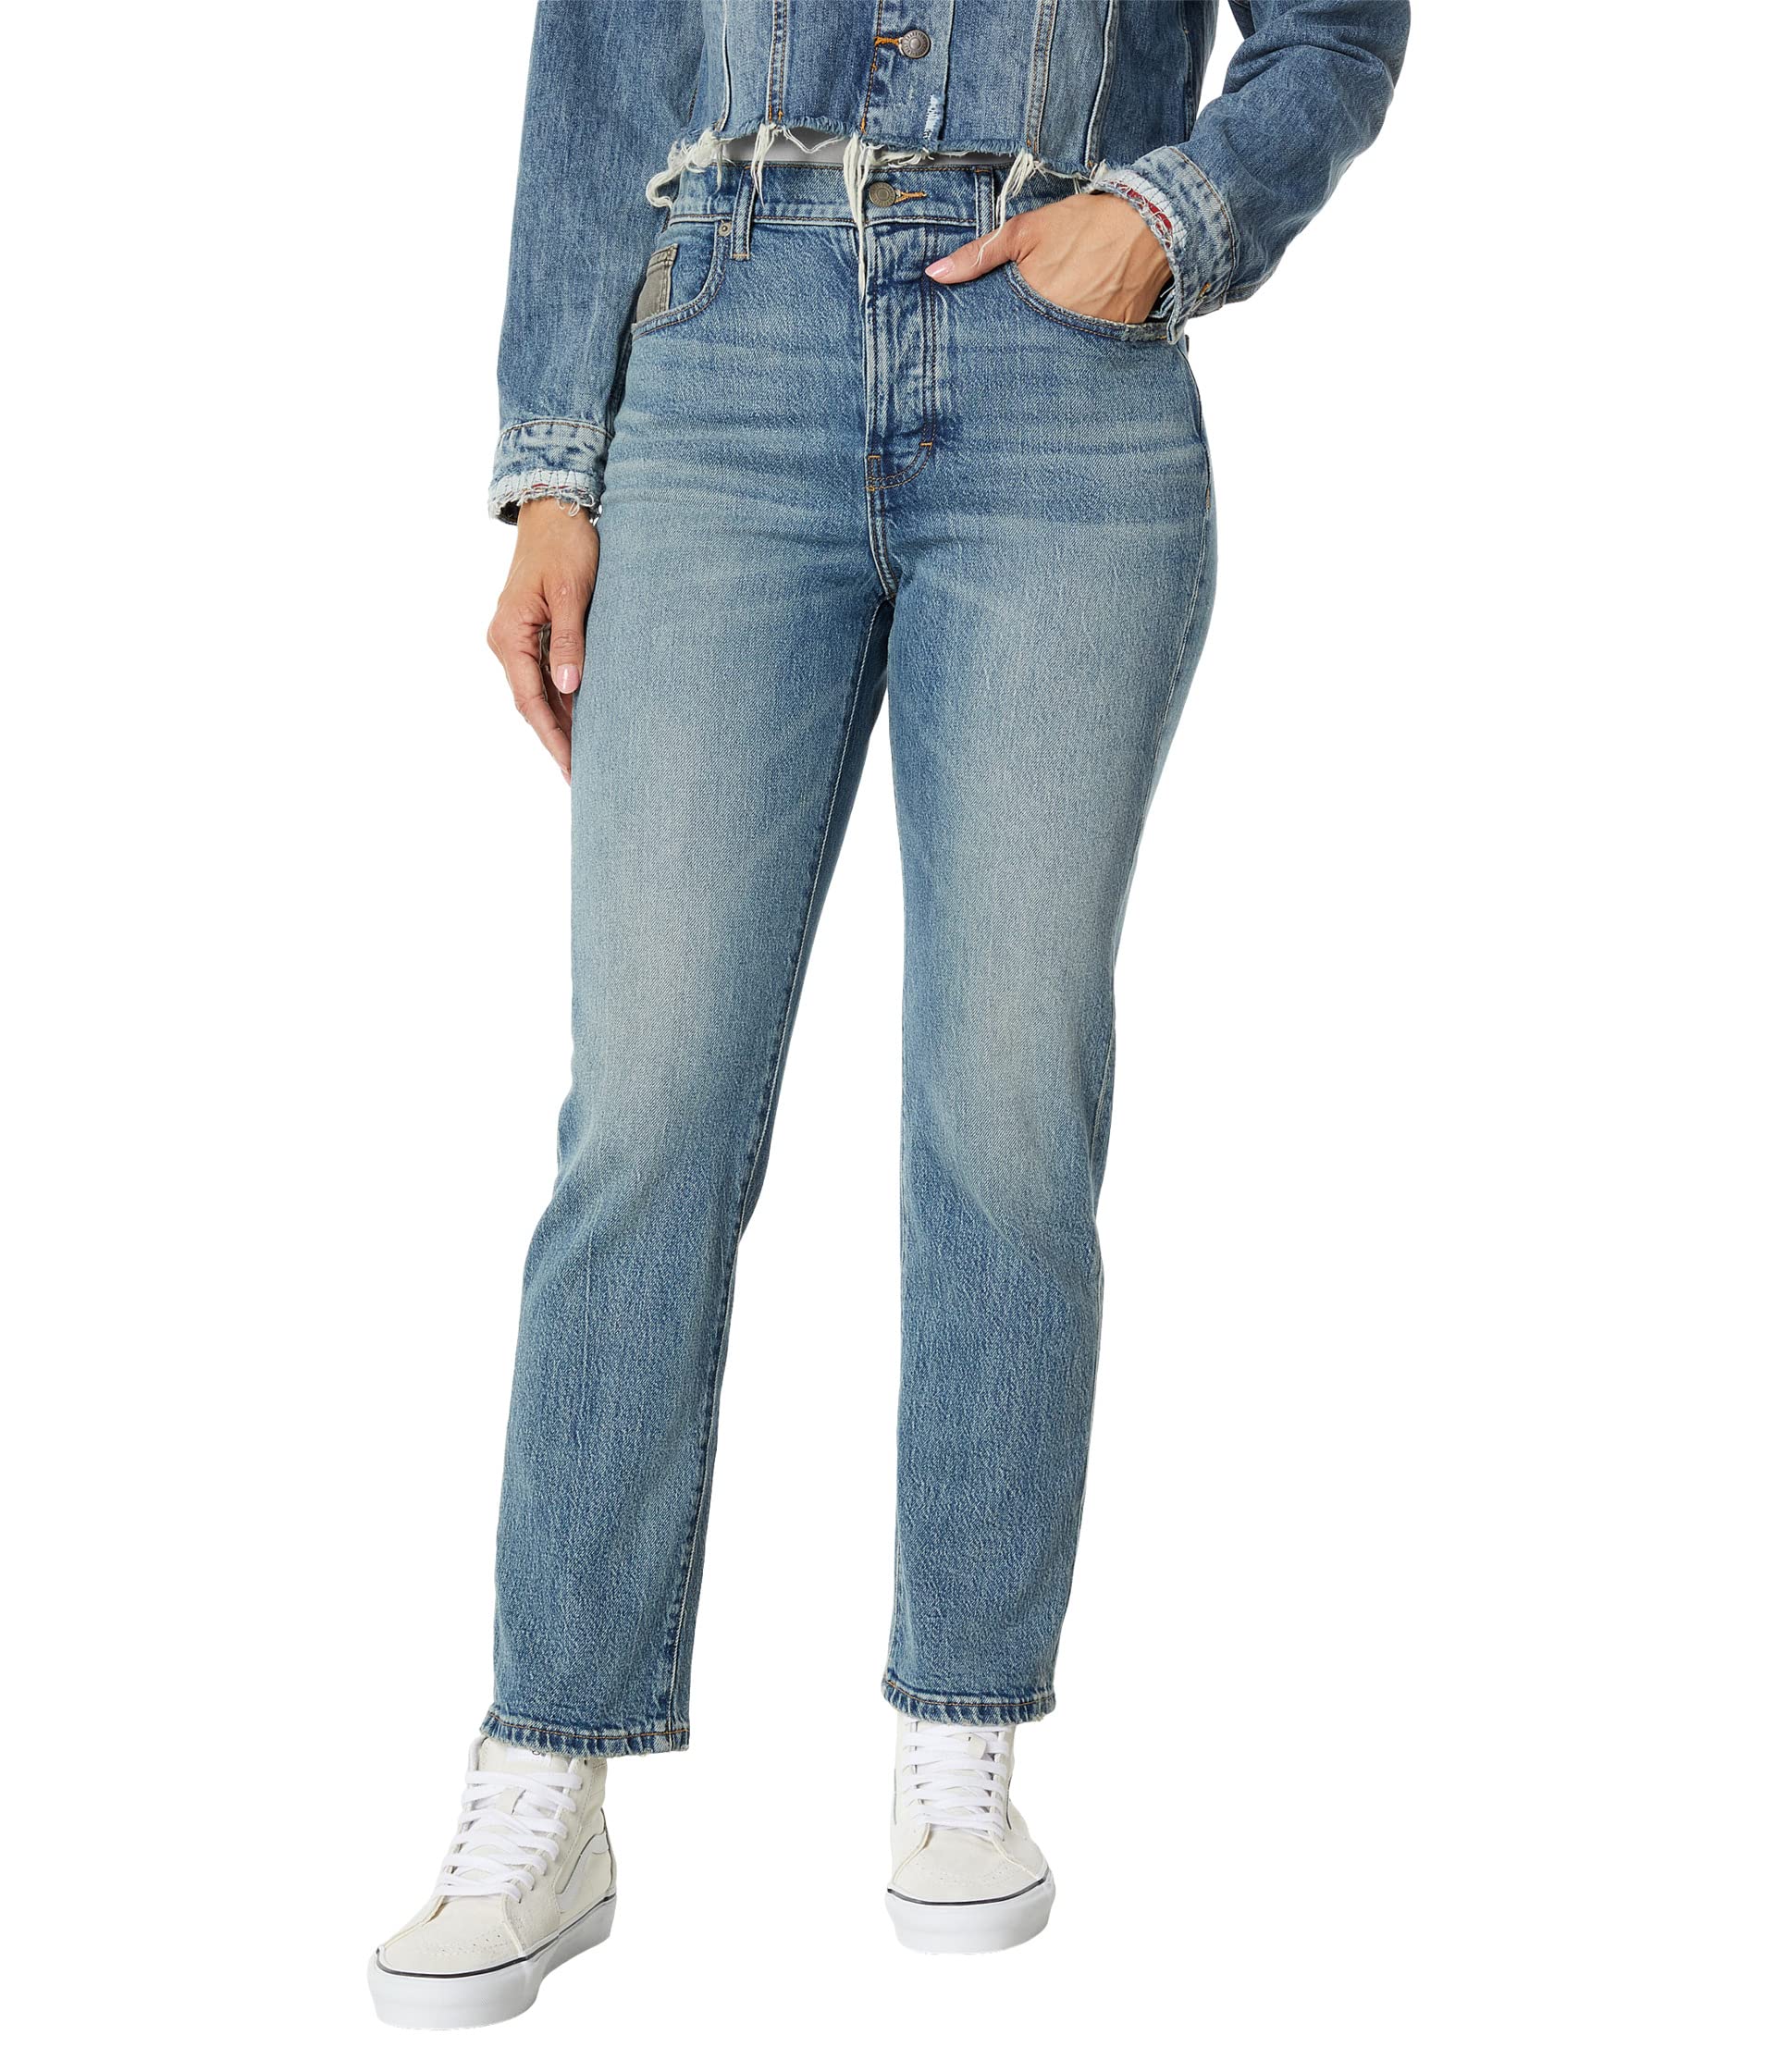 Джинсы Lucky Brand, High-Rise 90s Loose in Validated